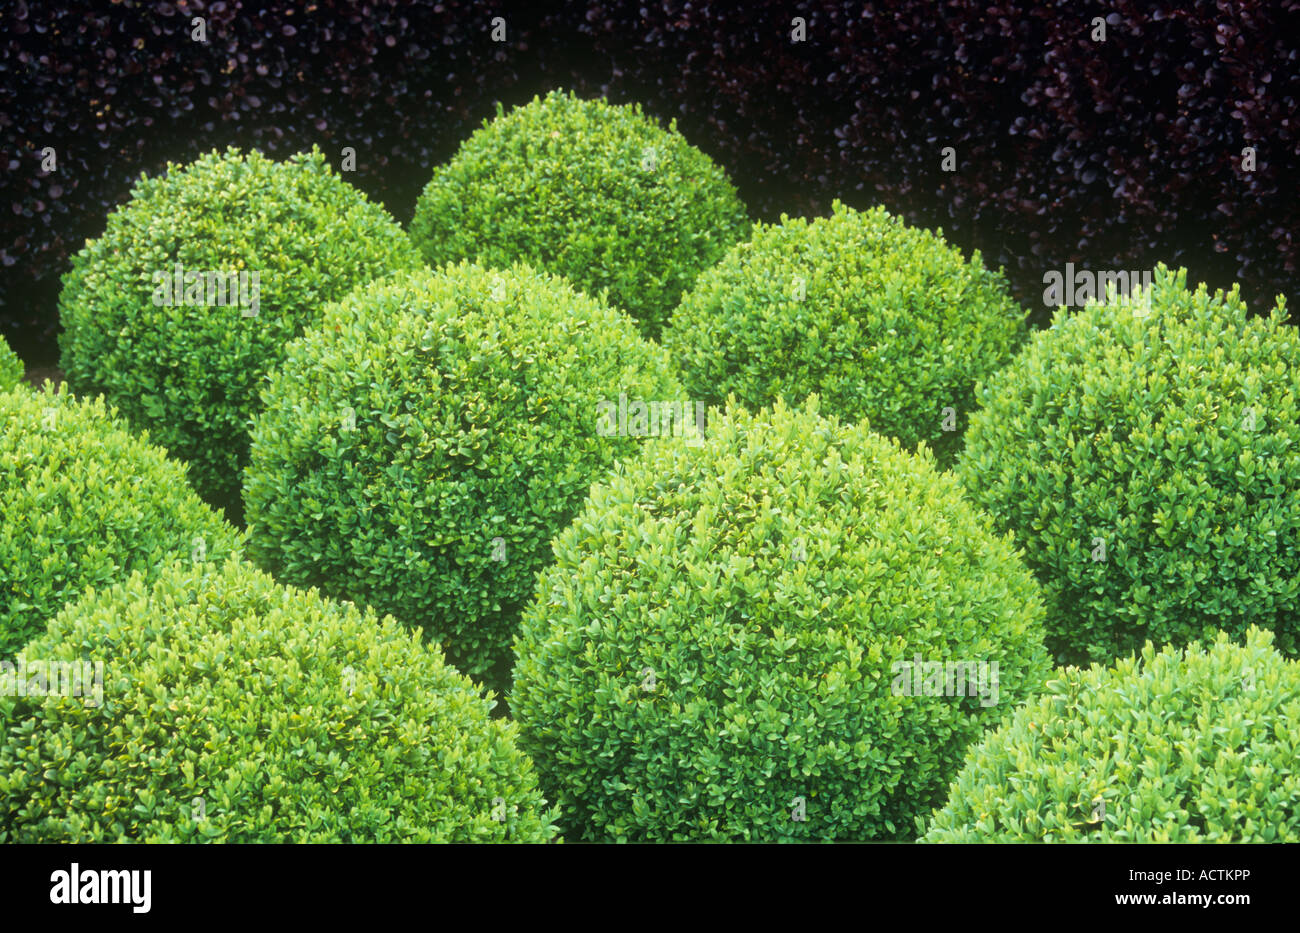 Light green Box or Buxus shrubs clipped into low spheres contrasting with deep purple of Barberry hedge or Berberis thunbergii Stock Photo